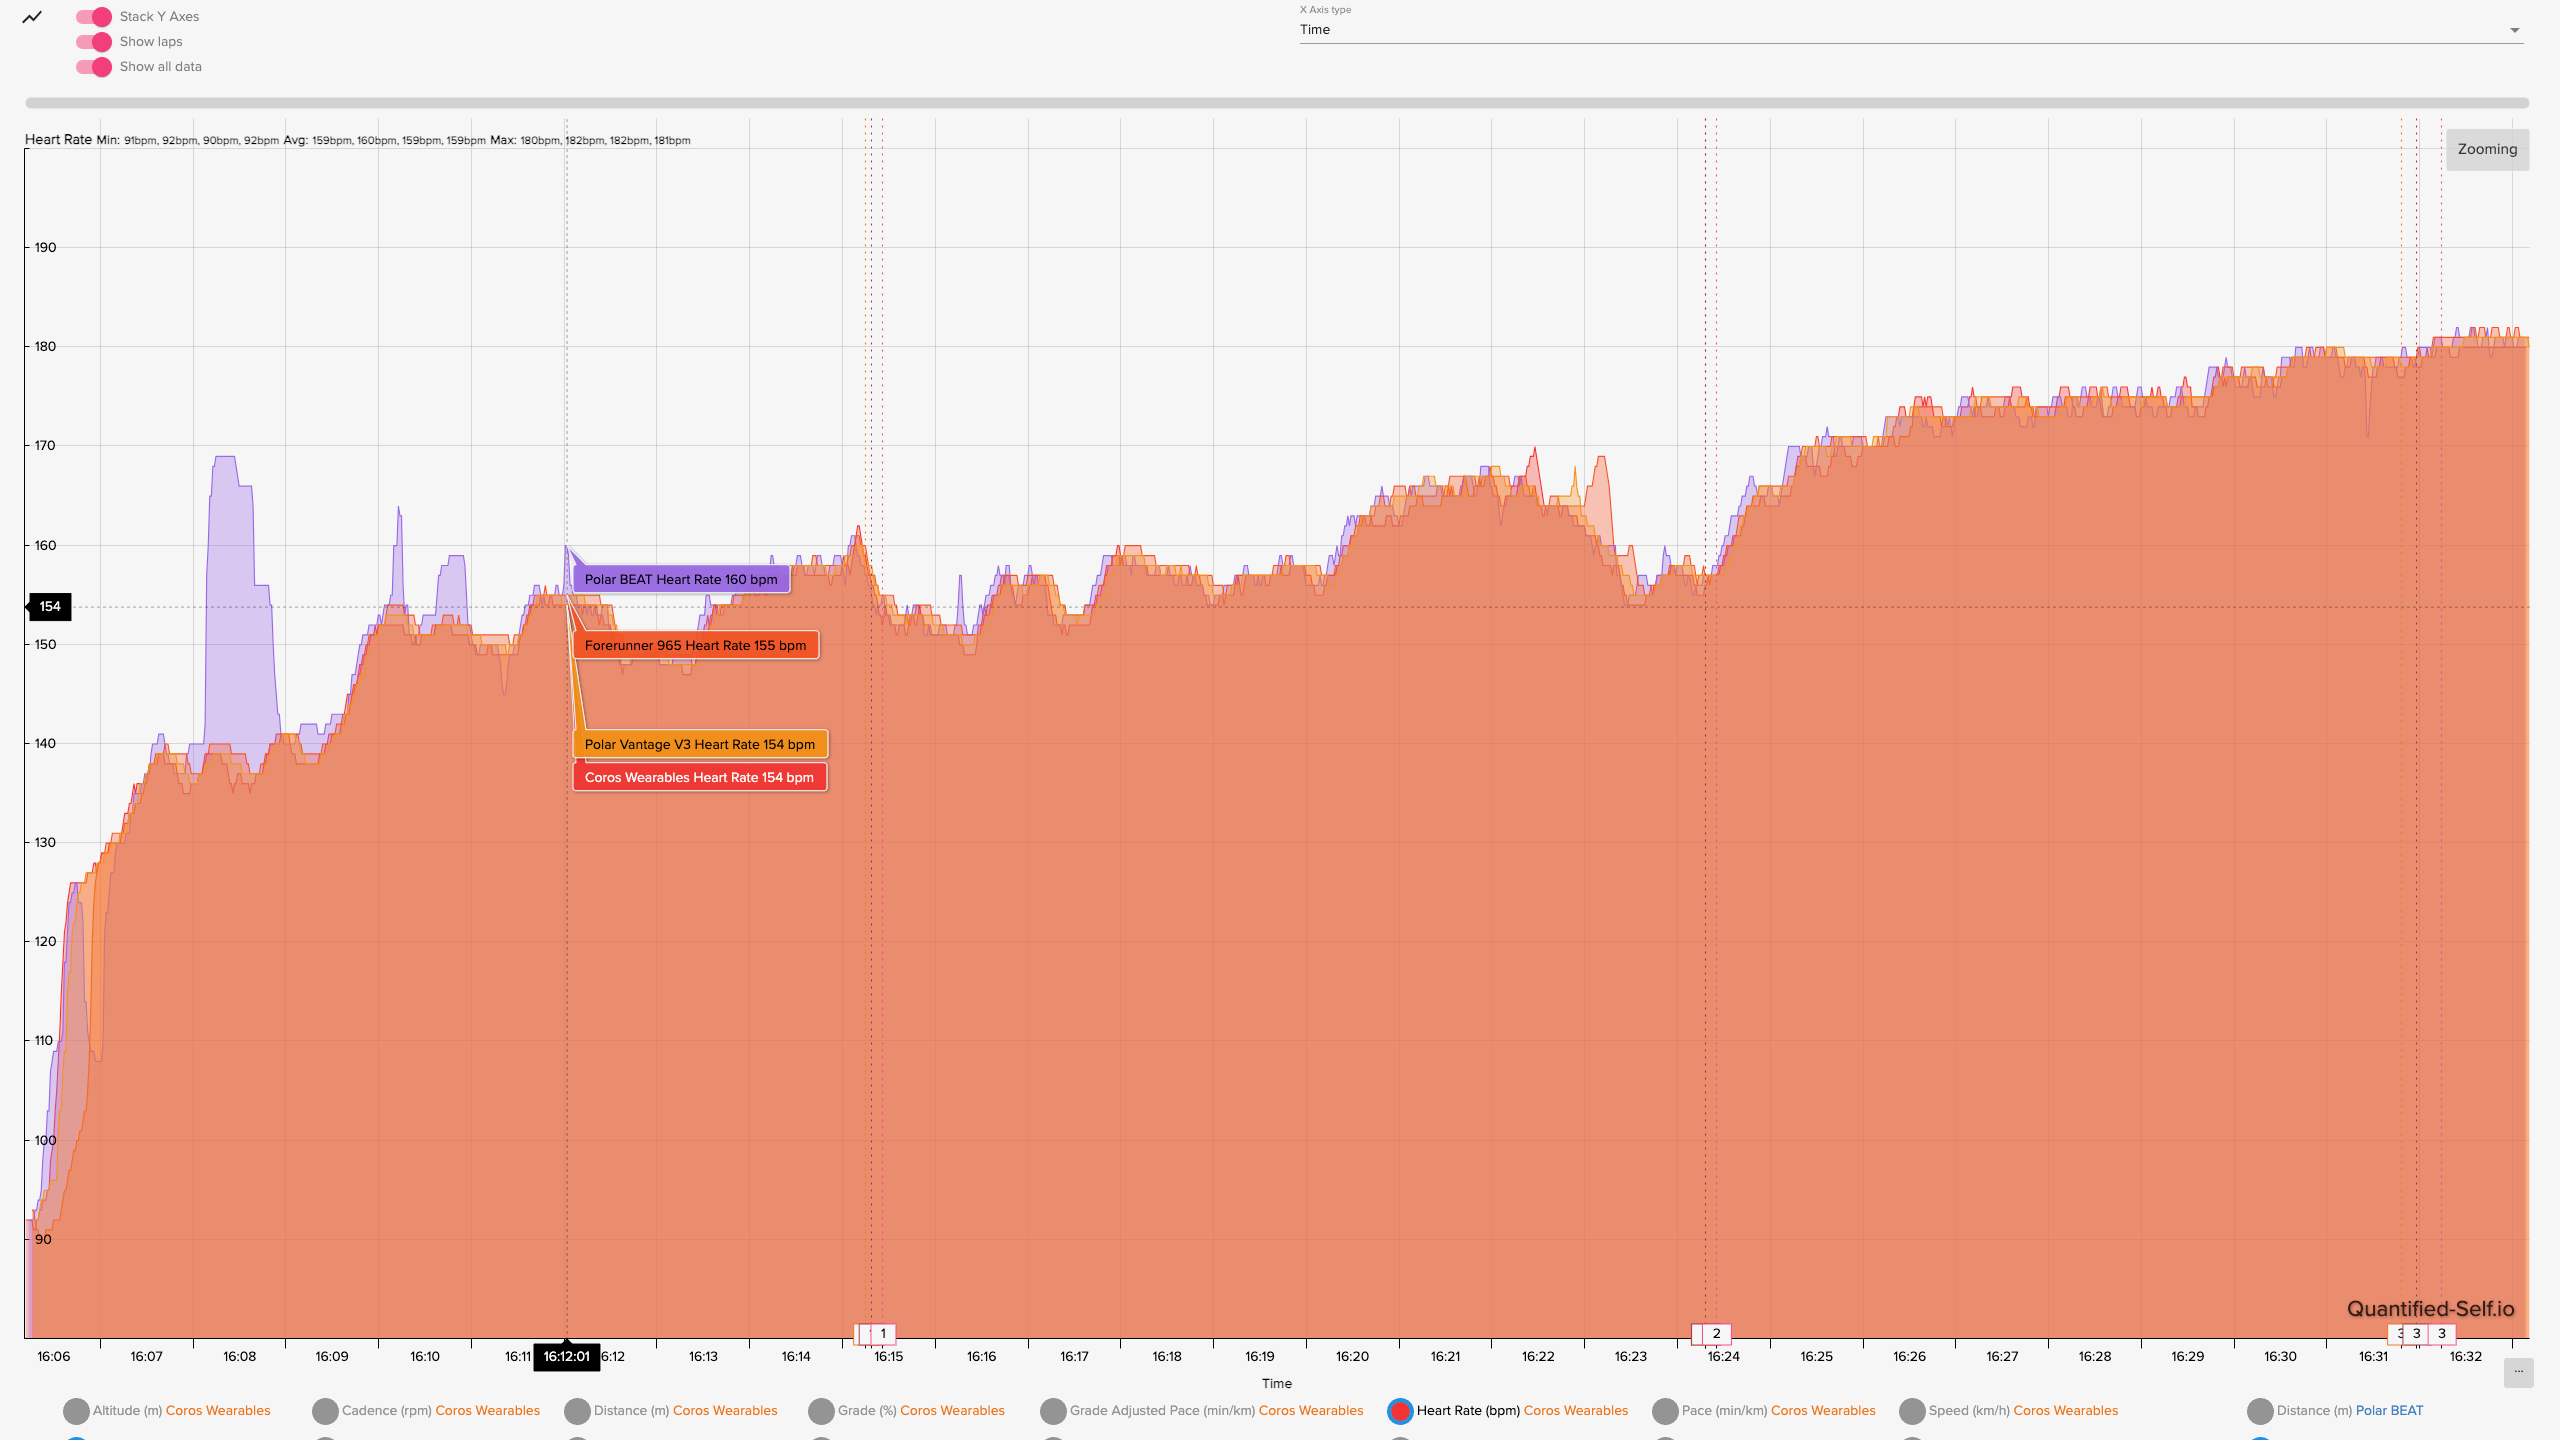 A HR chart showing the results for the COROS VERTIX 2S, Garmin Forerunner 965, Polar Vantage V3, and Polar H10 chest strap.